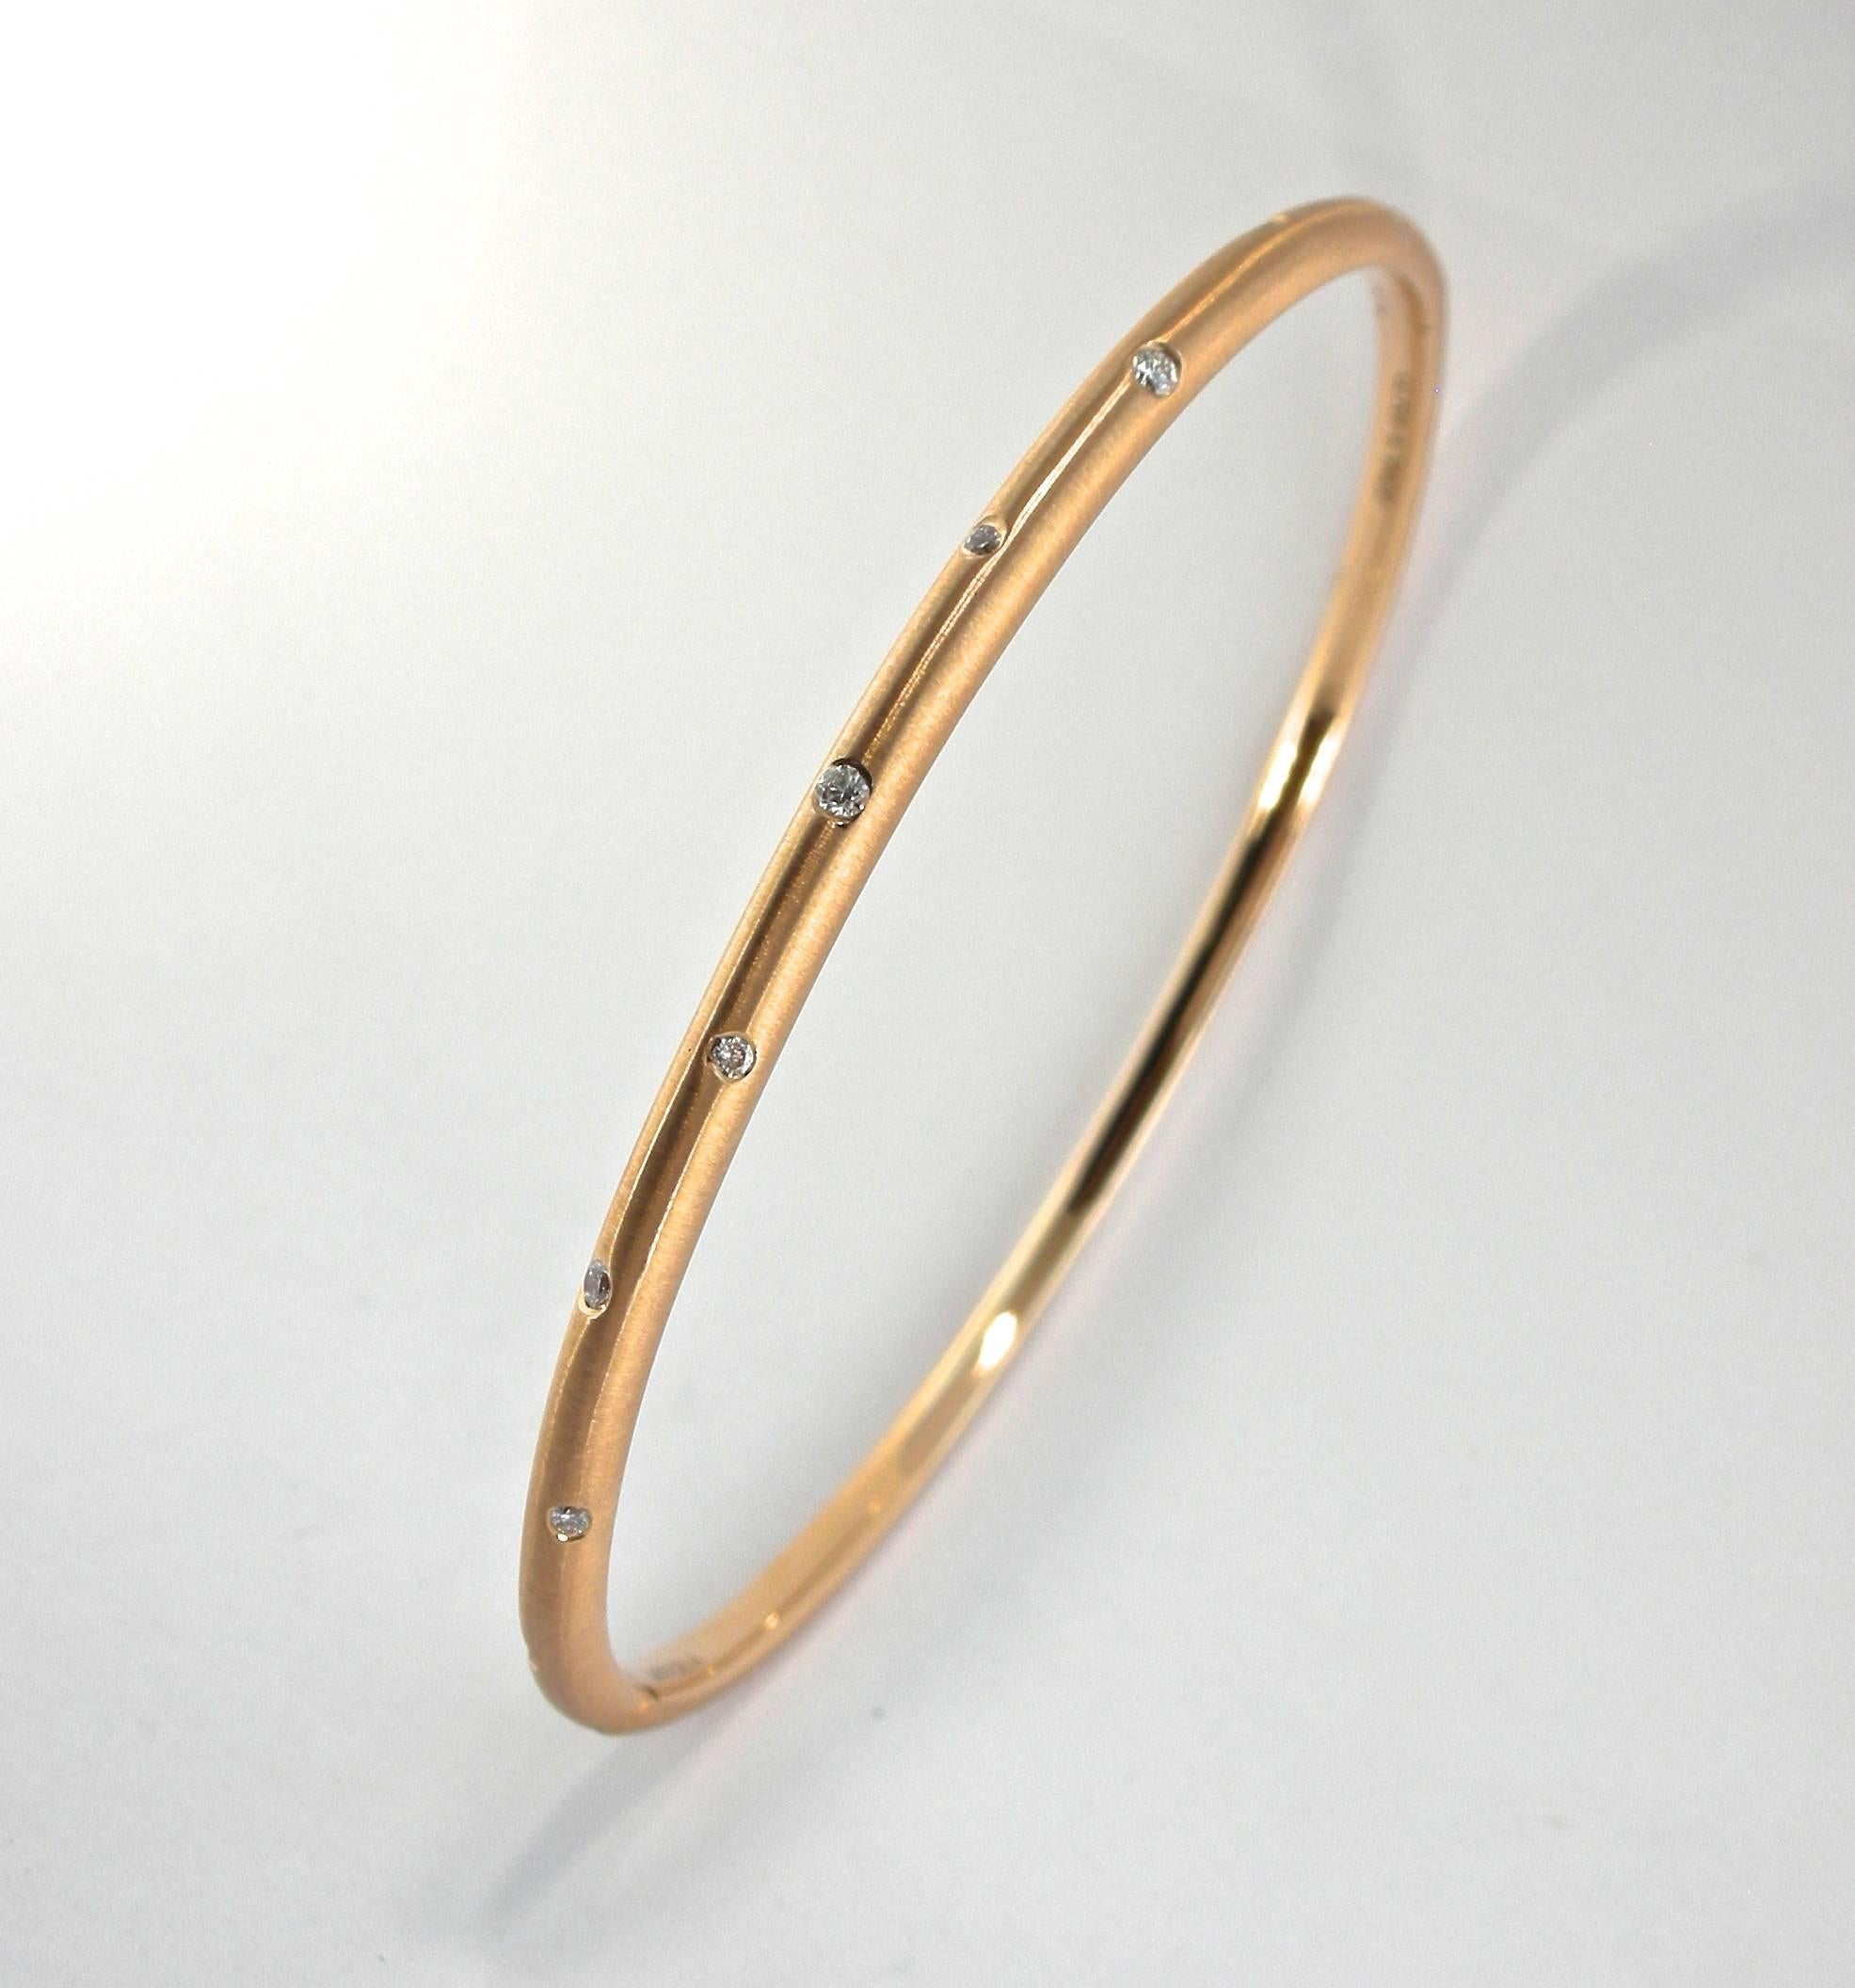 Alex Jona design collection, hand crafted in Italy, 18 karat brushed rose gold bangle bracelet set with 9 white diamonds, weighing 0.14 carats in total, F color, VS2 clarity.

Alex Jona jewels stand out, not only for their special design and for the